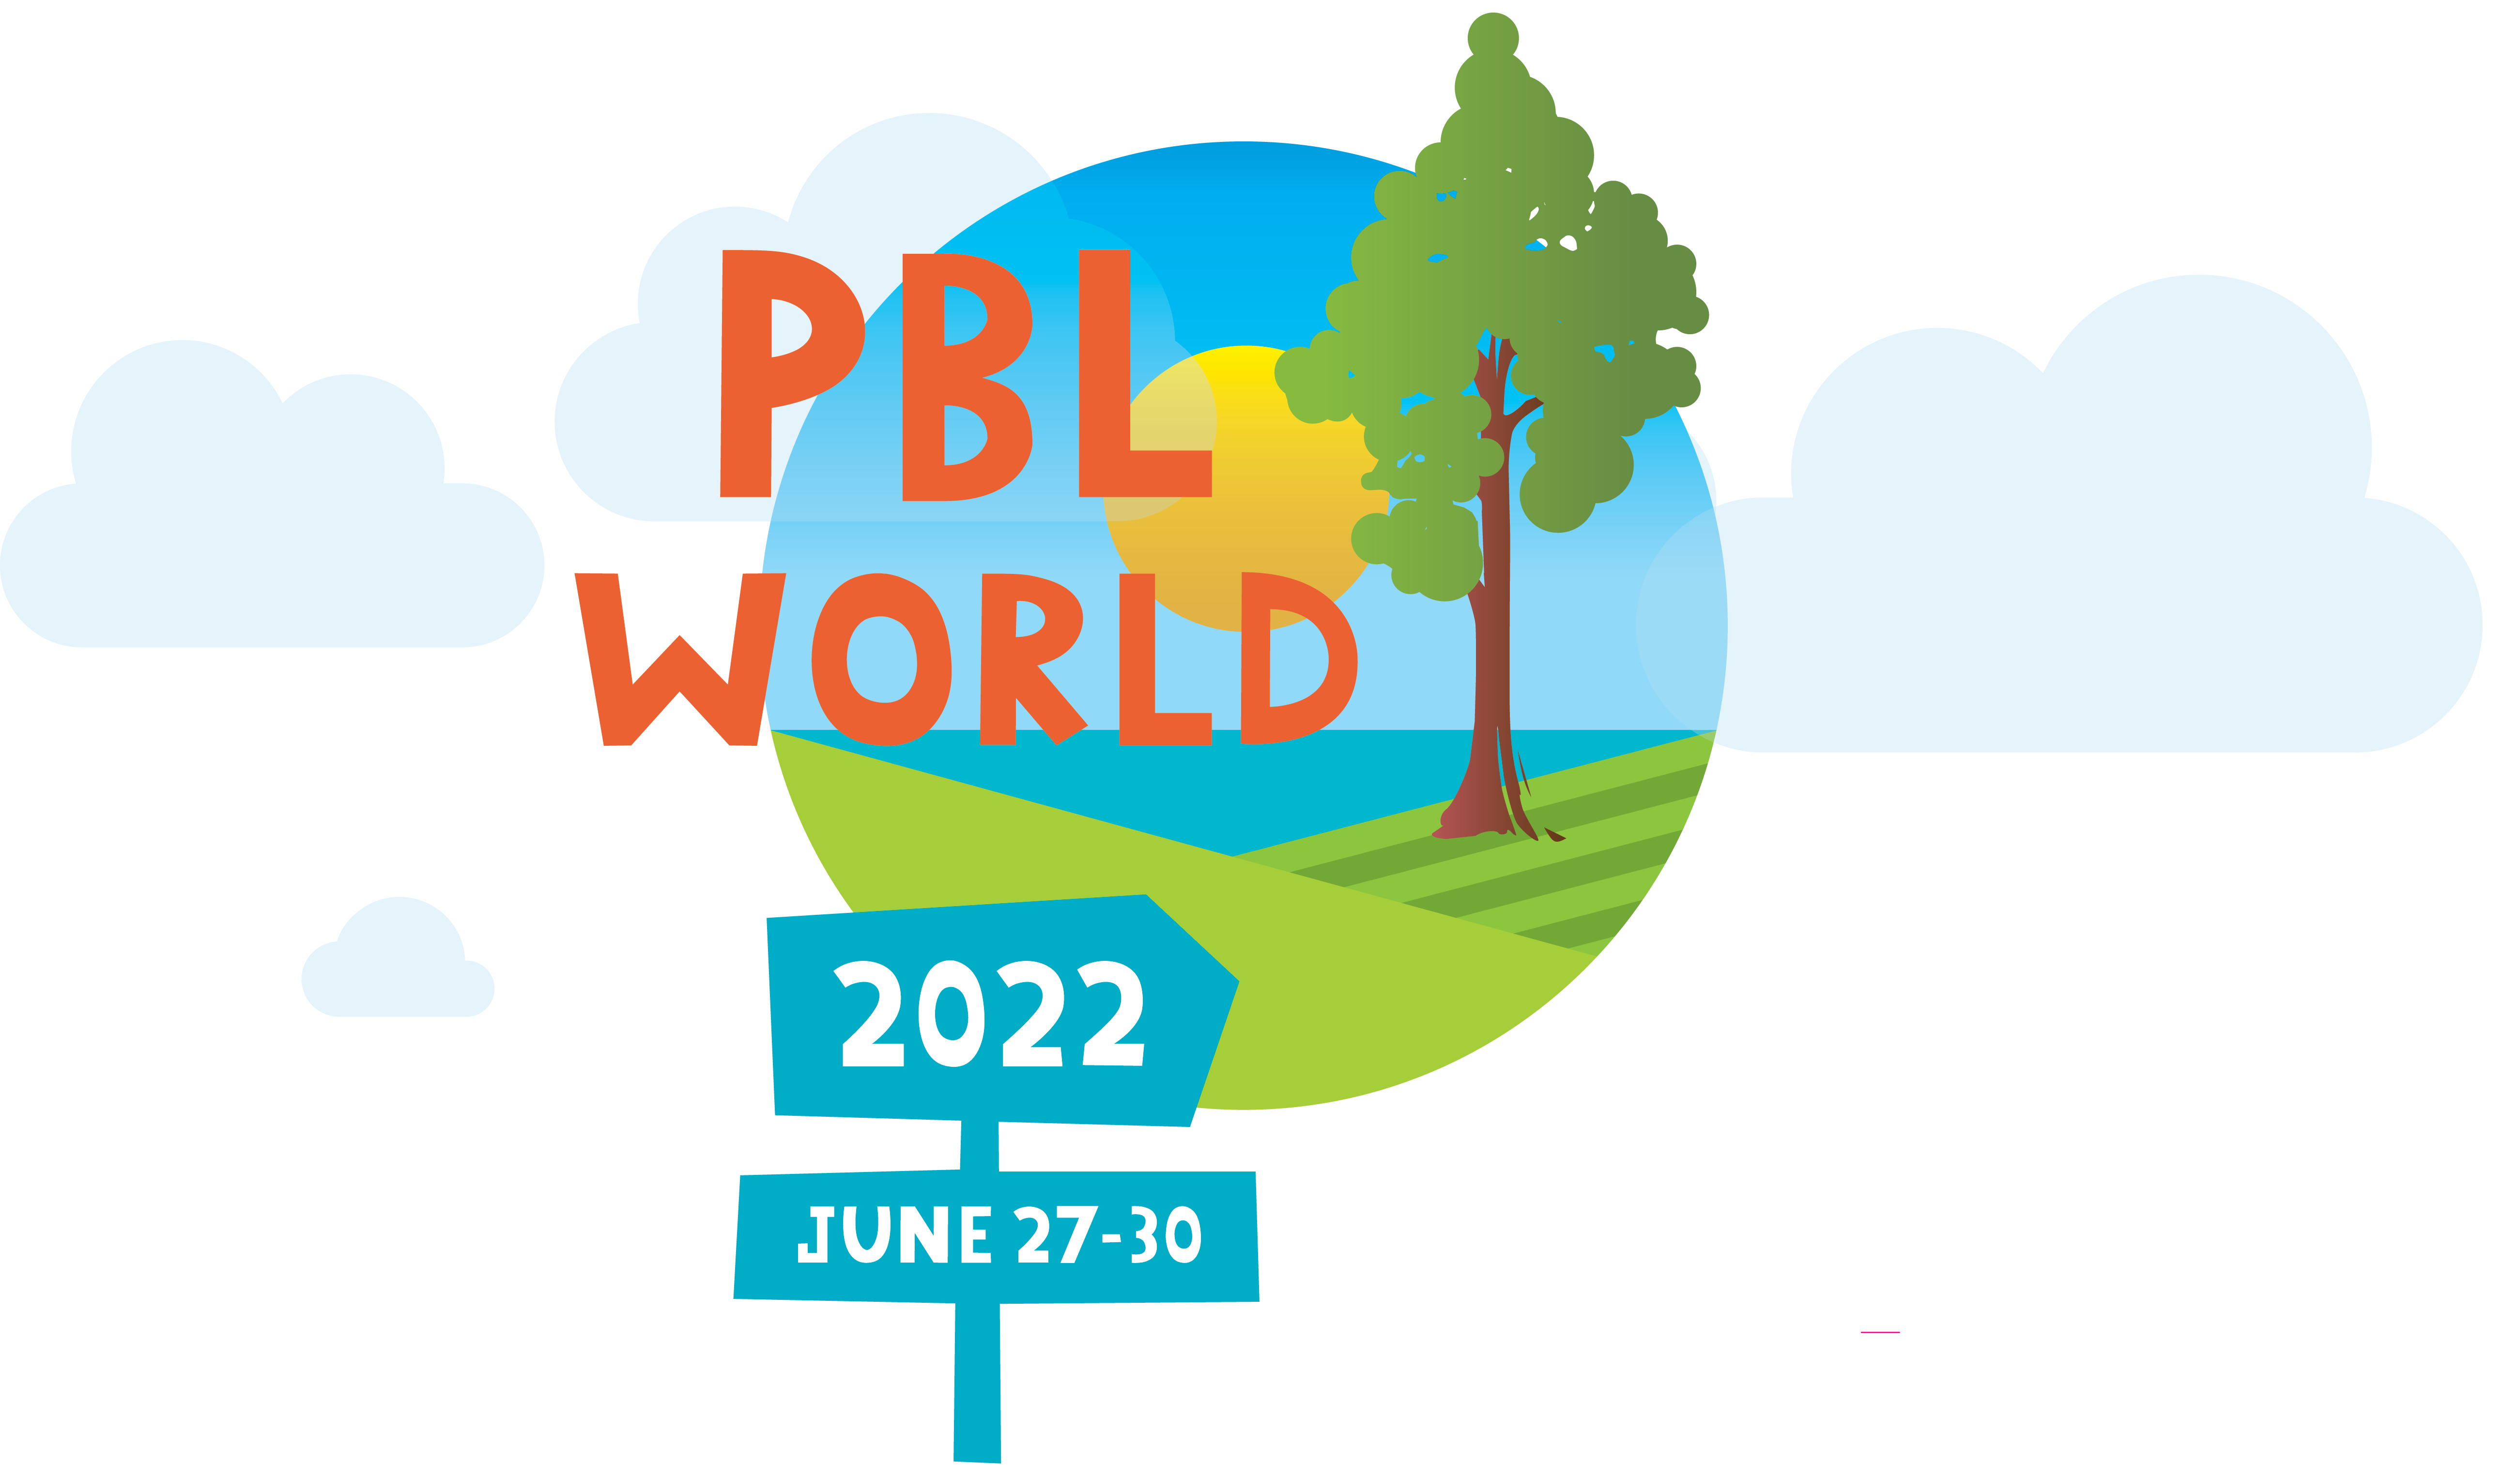 PBL World 2022: Deep Diving into the Role of the Coach